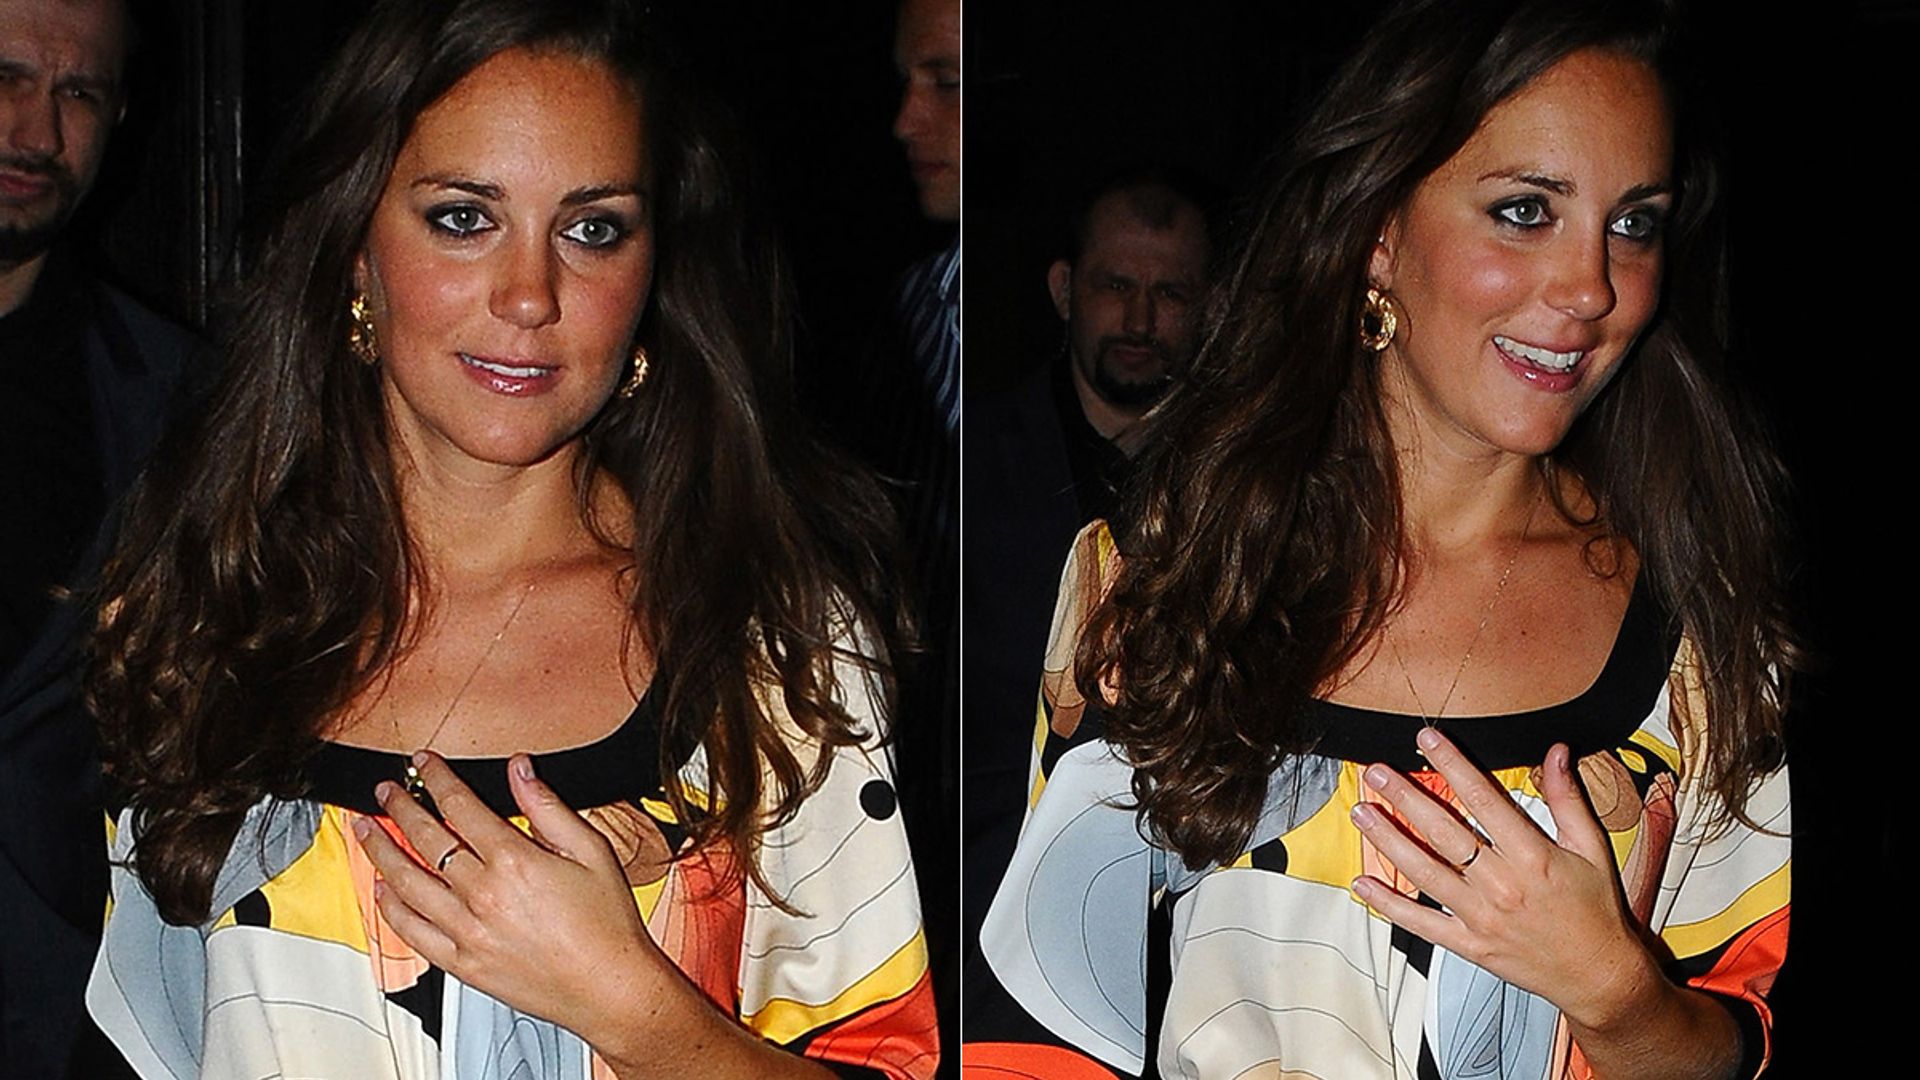 Princess Kate's memorable quirky clubbing look is seriously bold